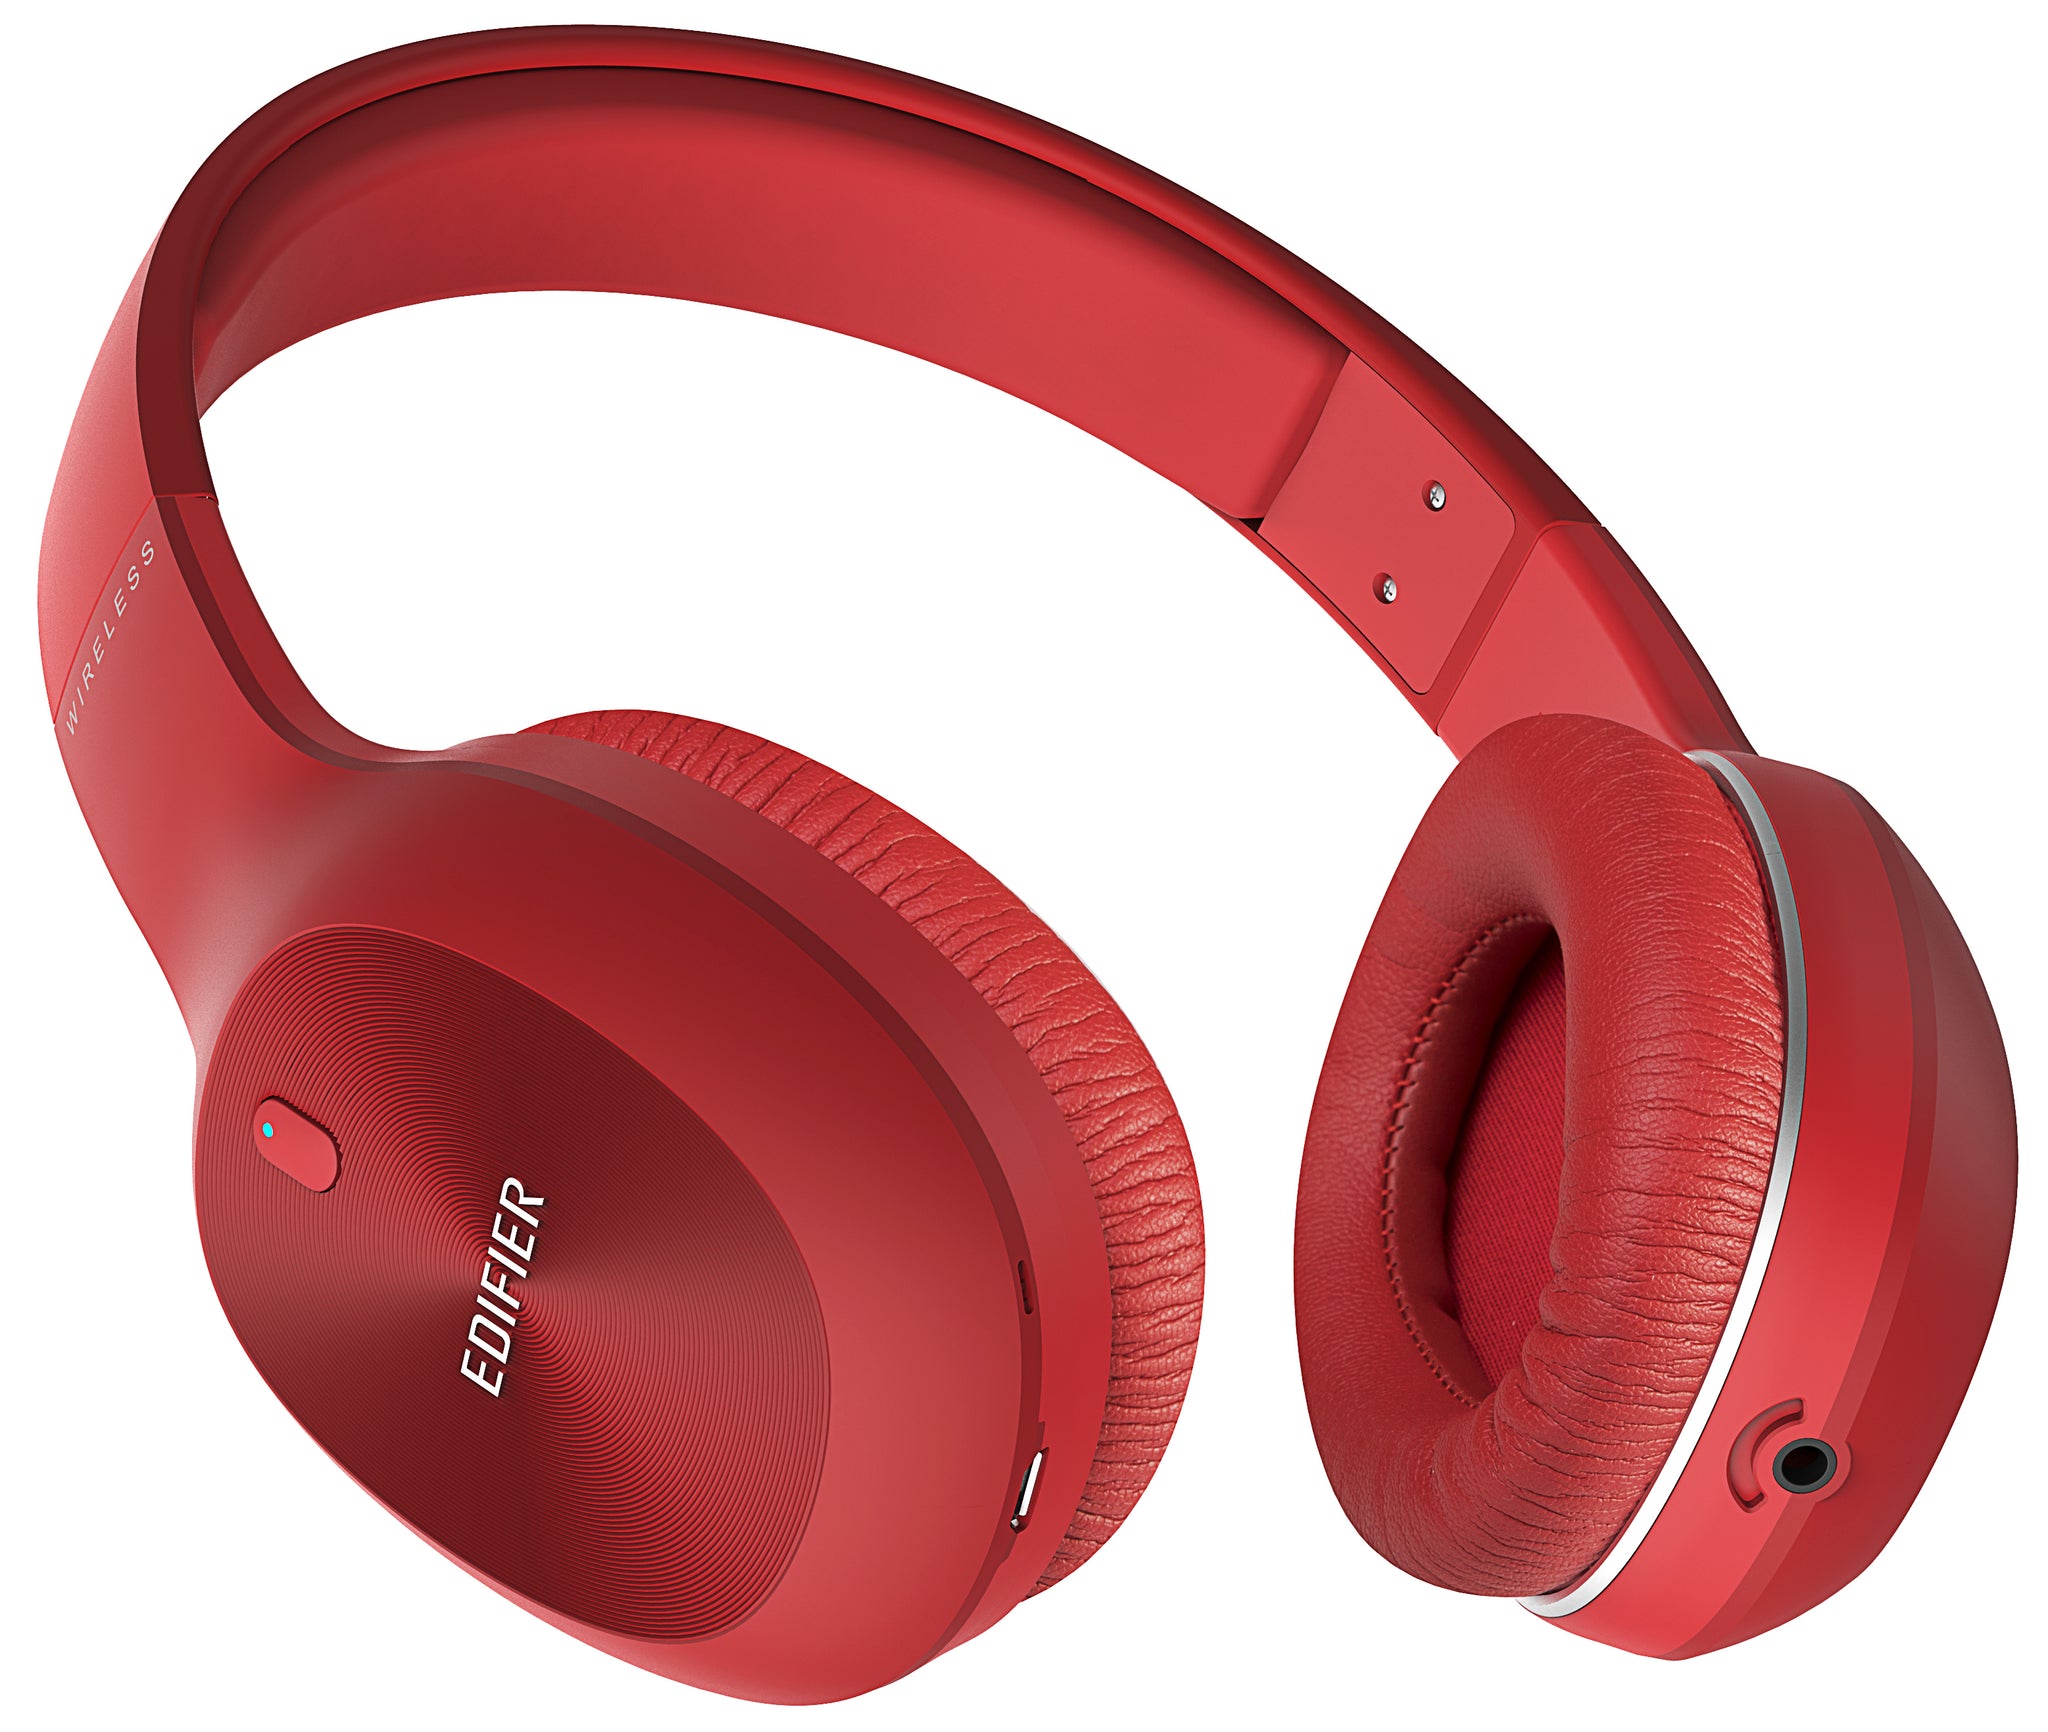 Edifier W800BT Plus Wired And Wireless Bluetooth Headphones - Red